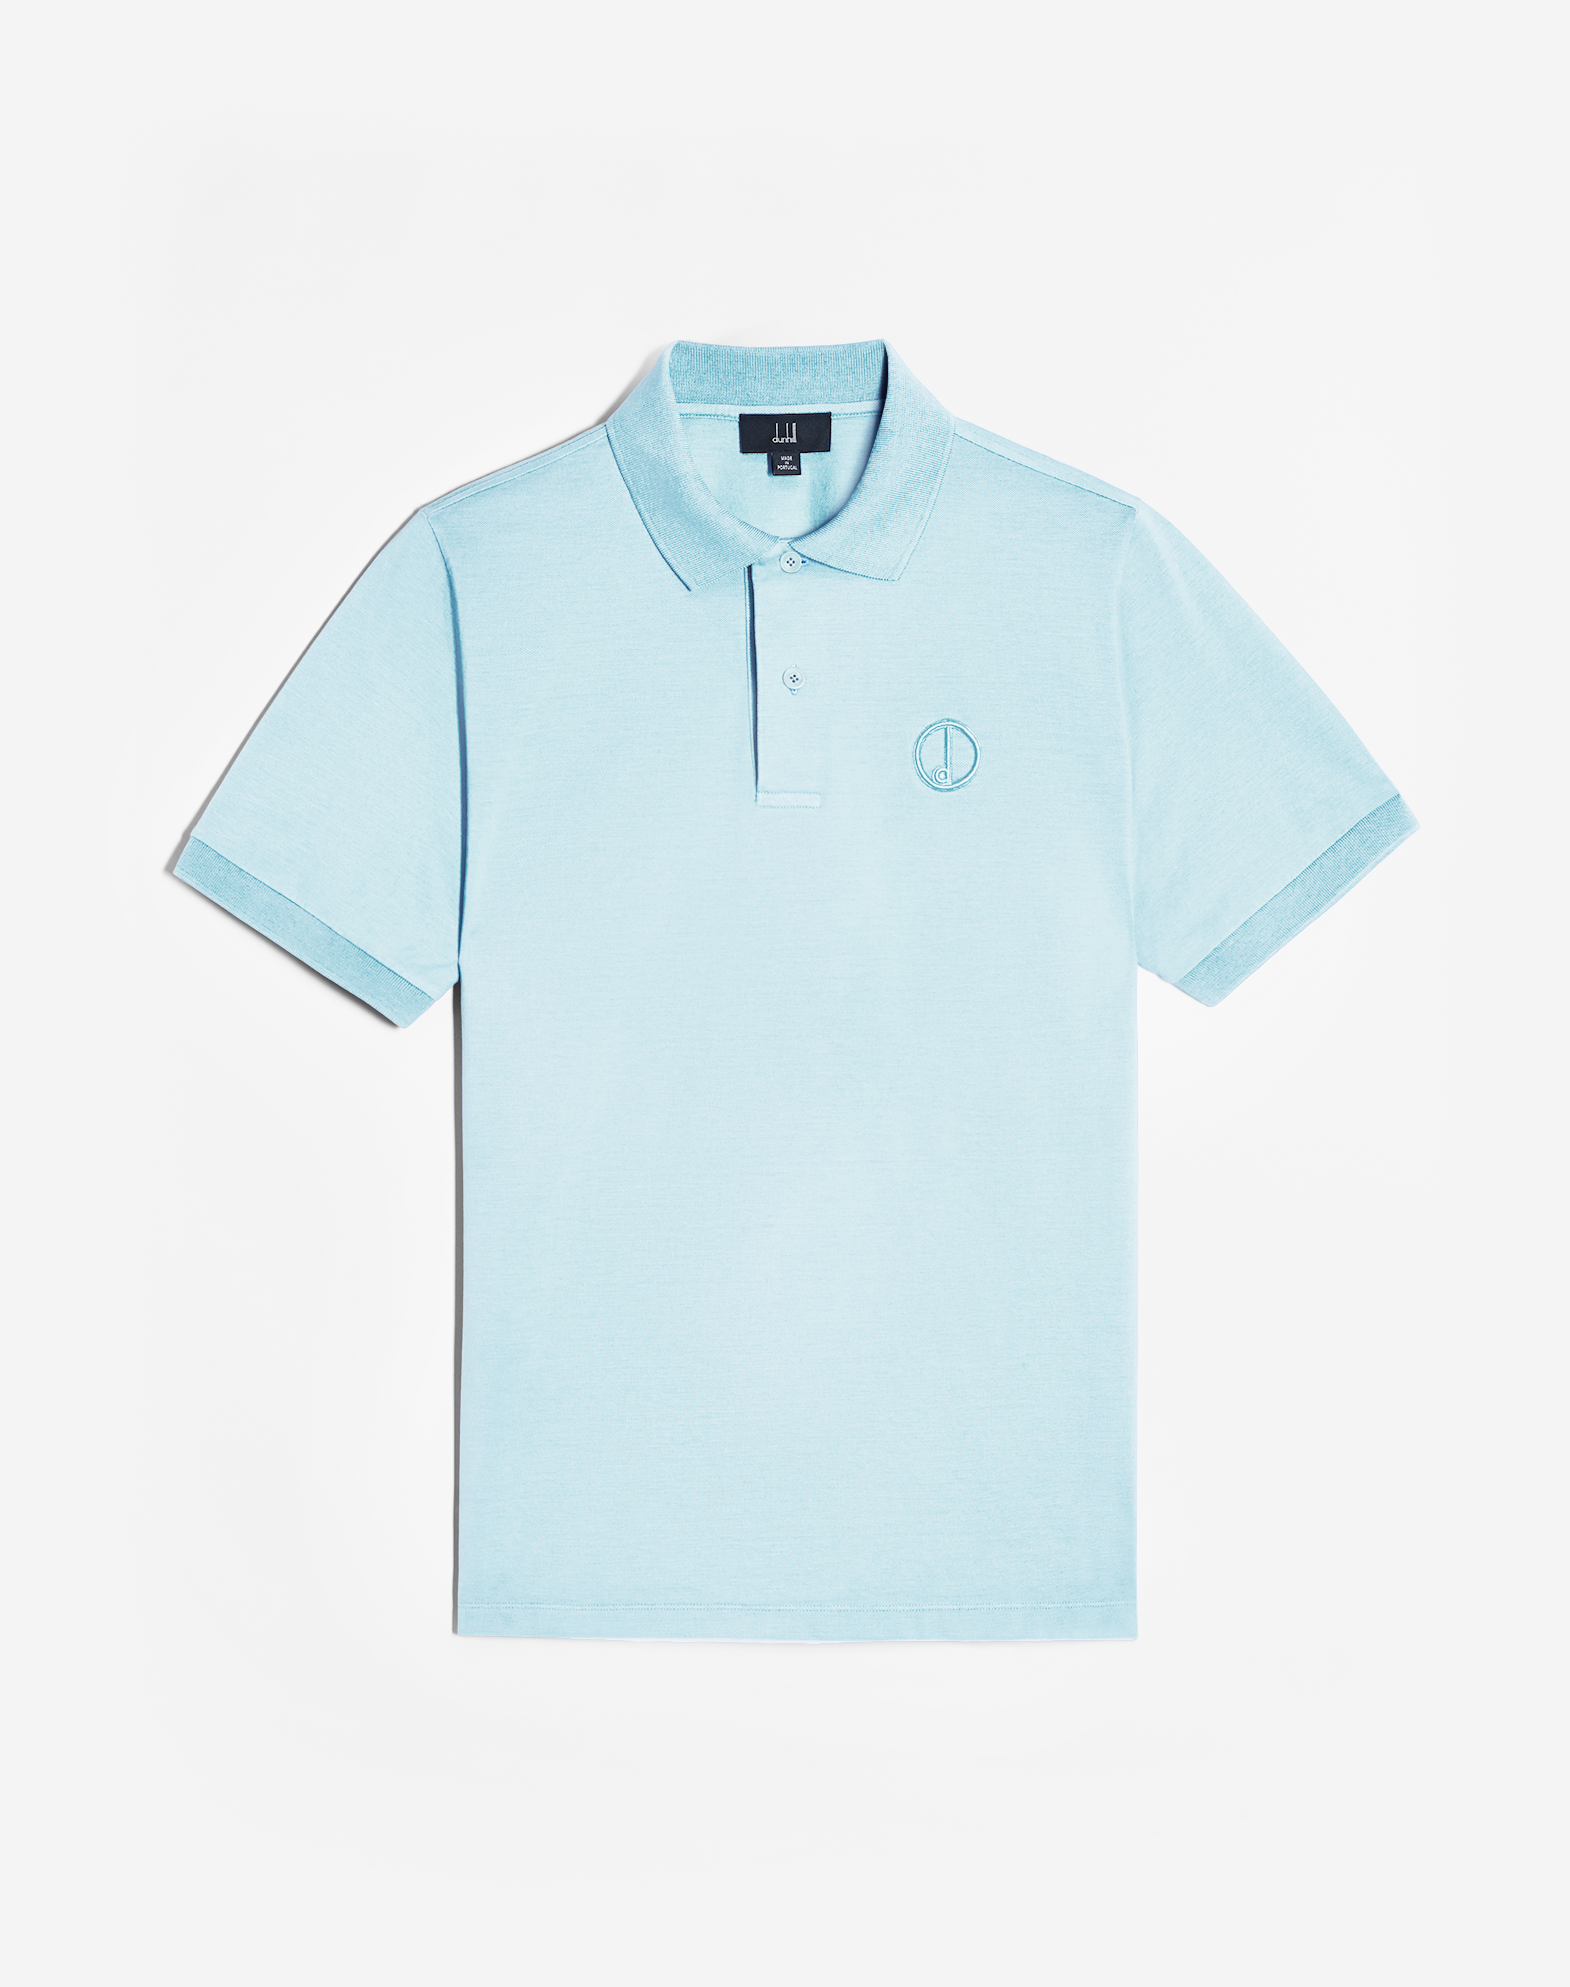 Dunhill D Polo In Blue Skies